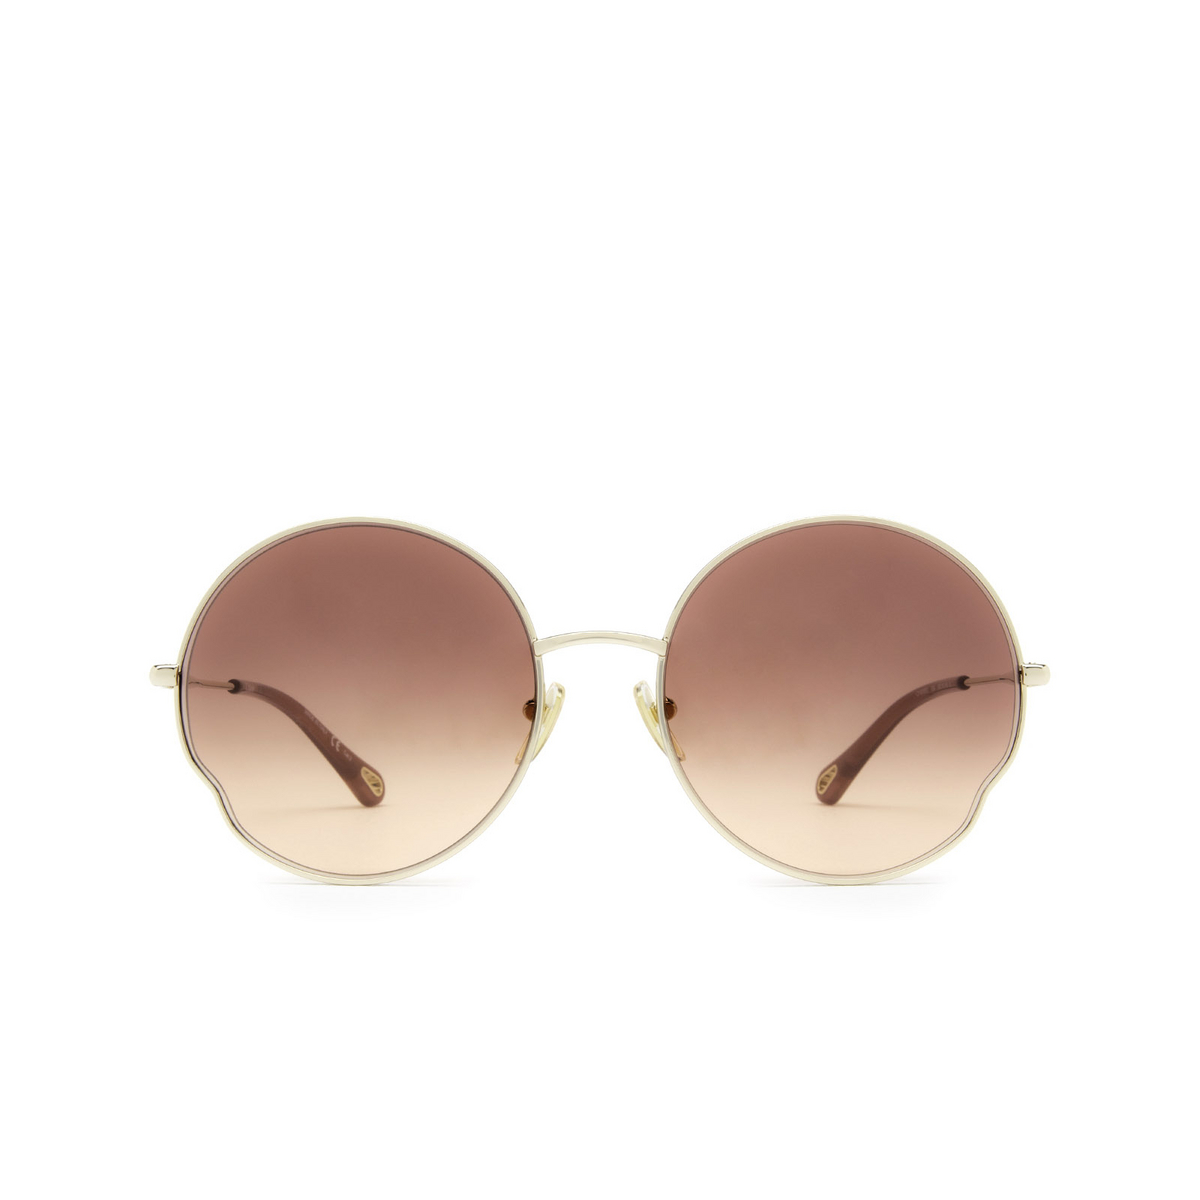 Chloé® Round Sunglasses: CH0095S color Gold 004 - front view.